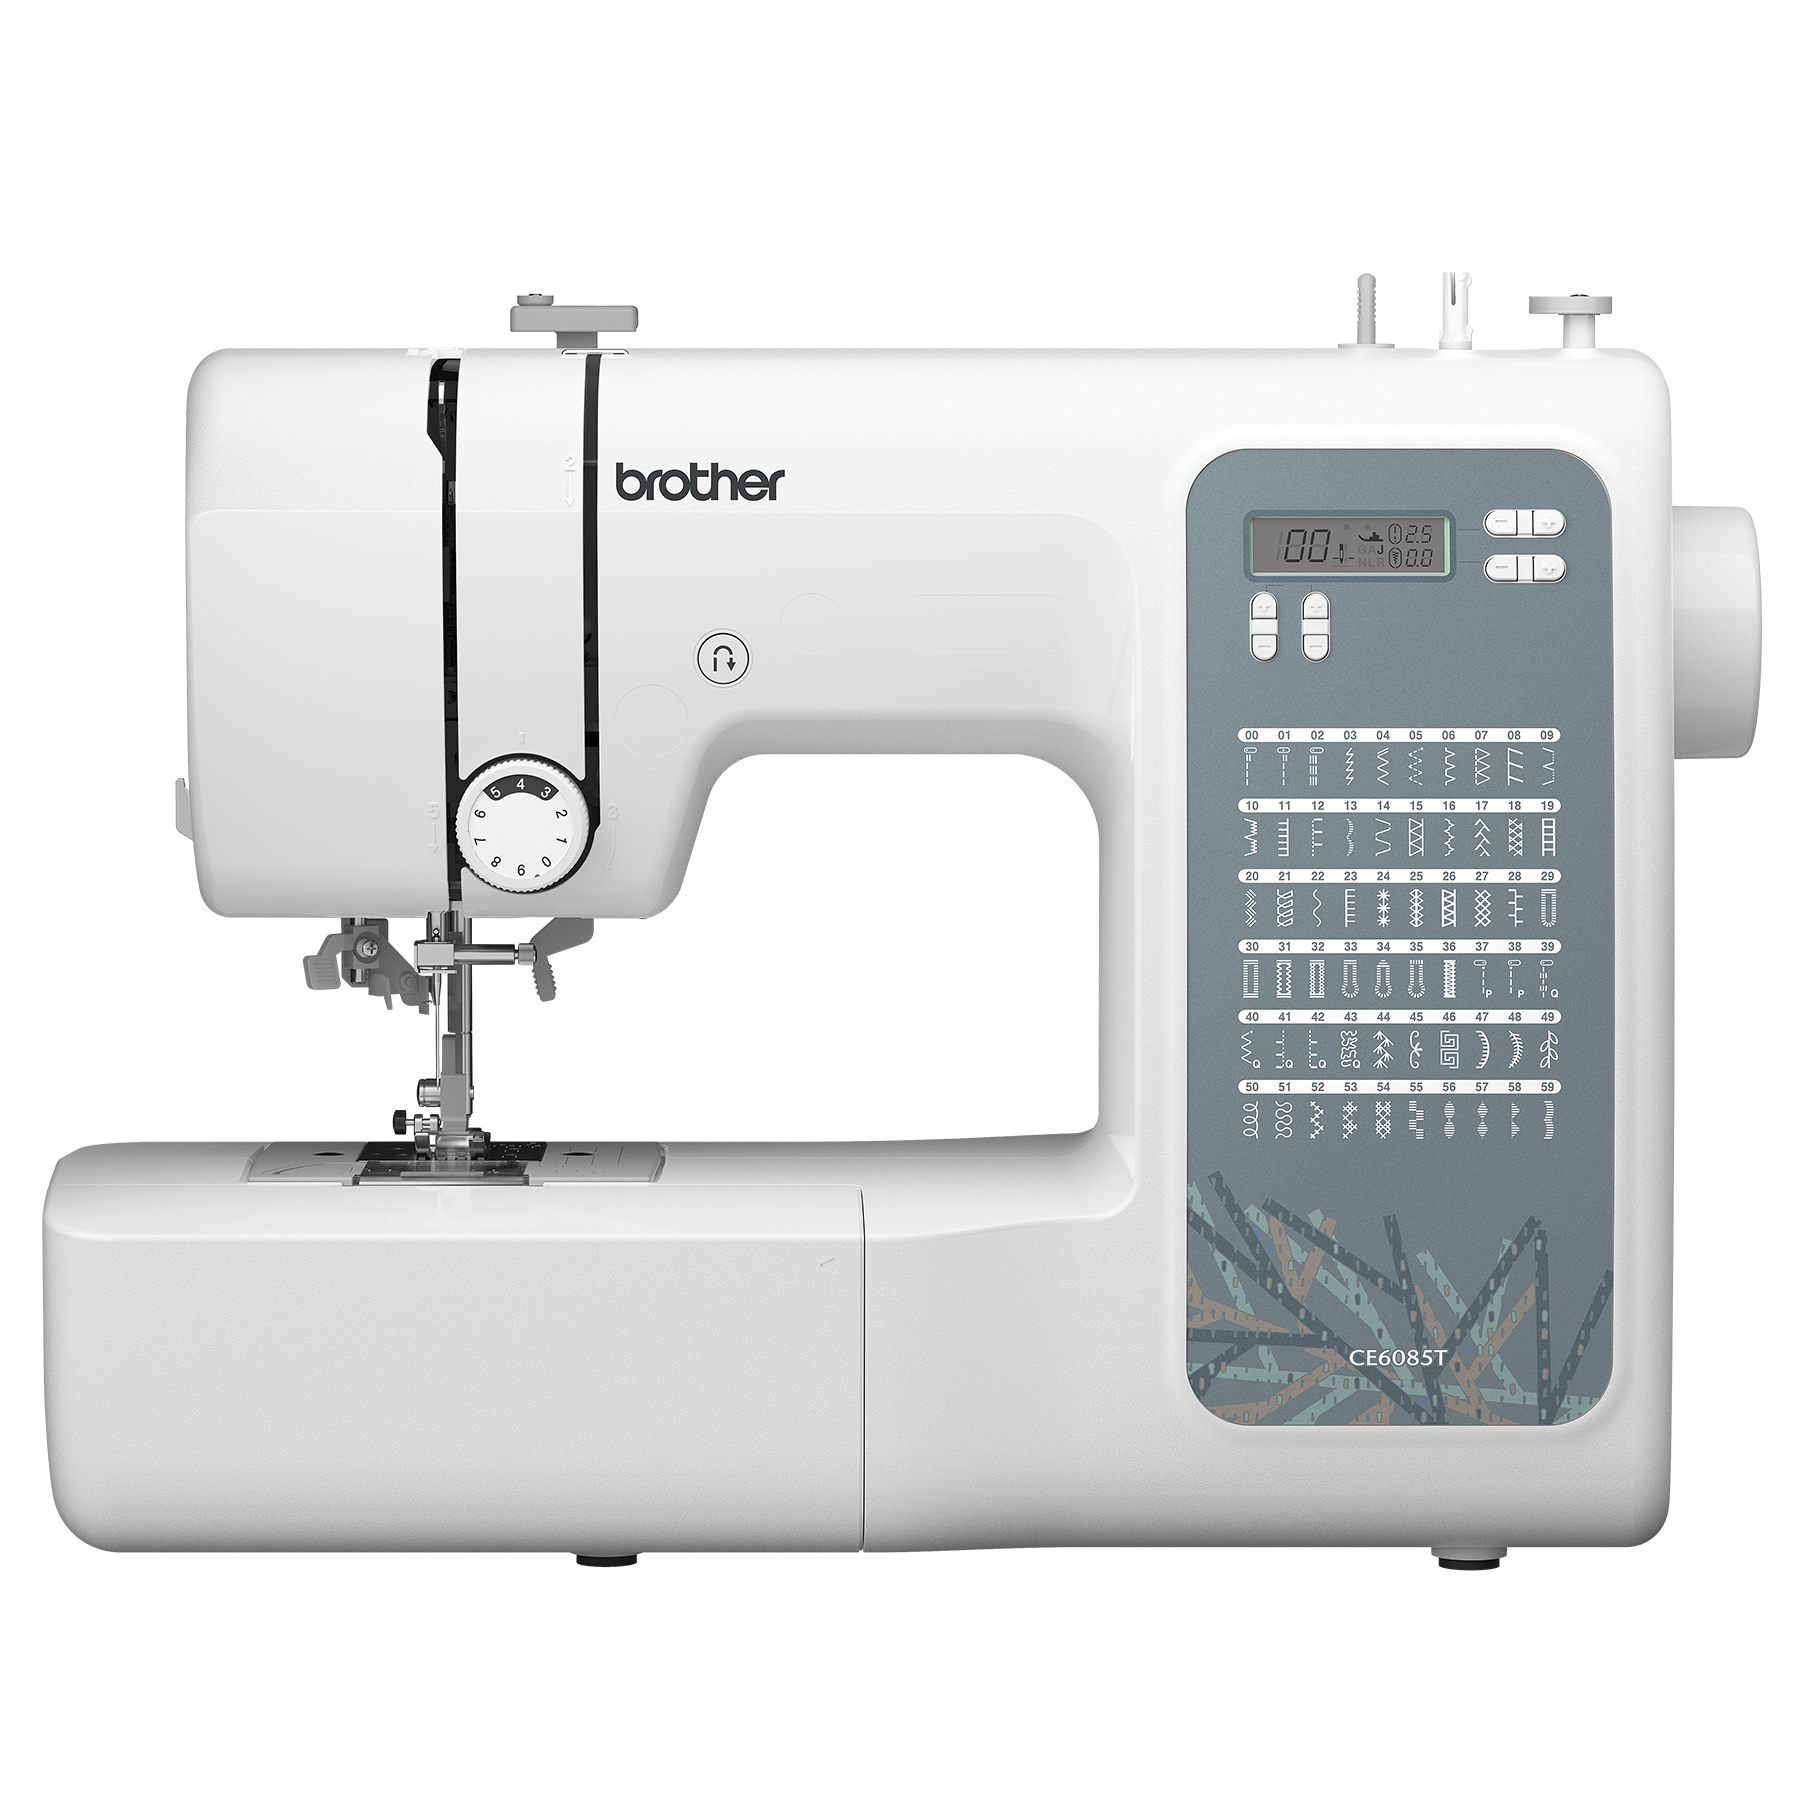 Image of Brother CE6085T Computerized Sewing Machine